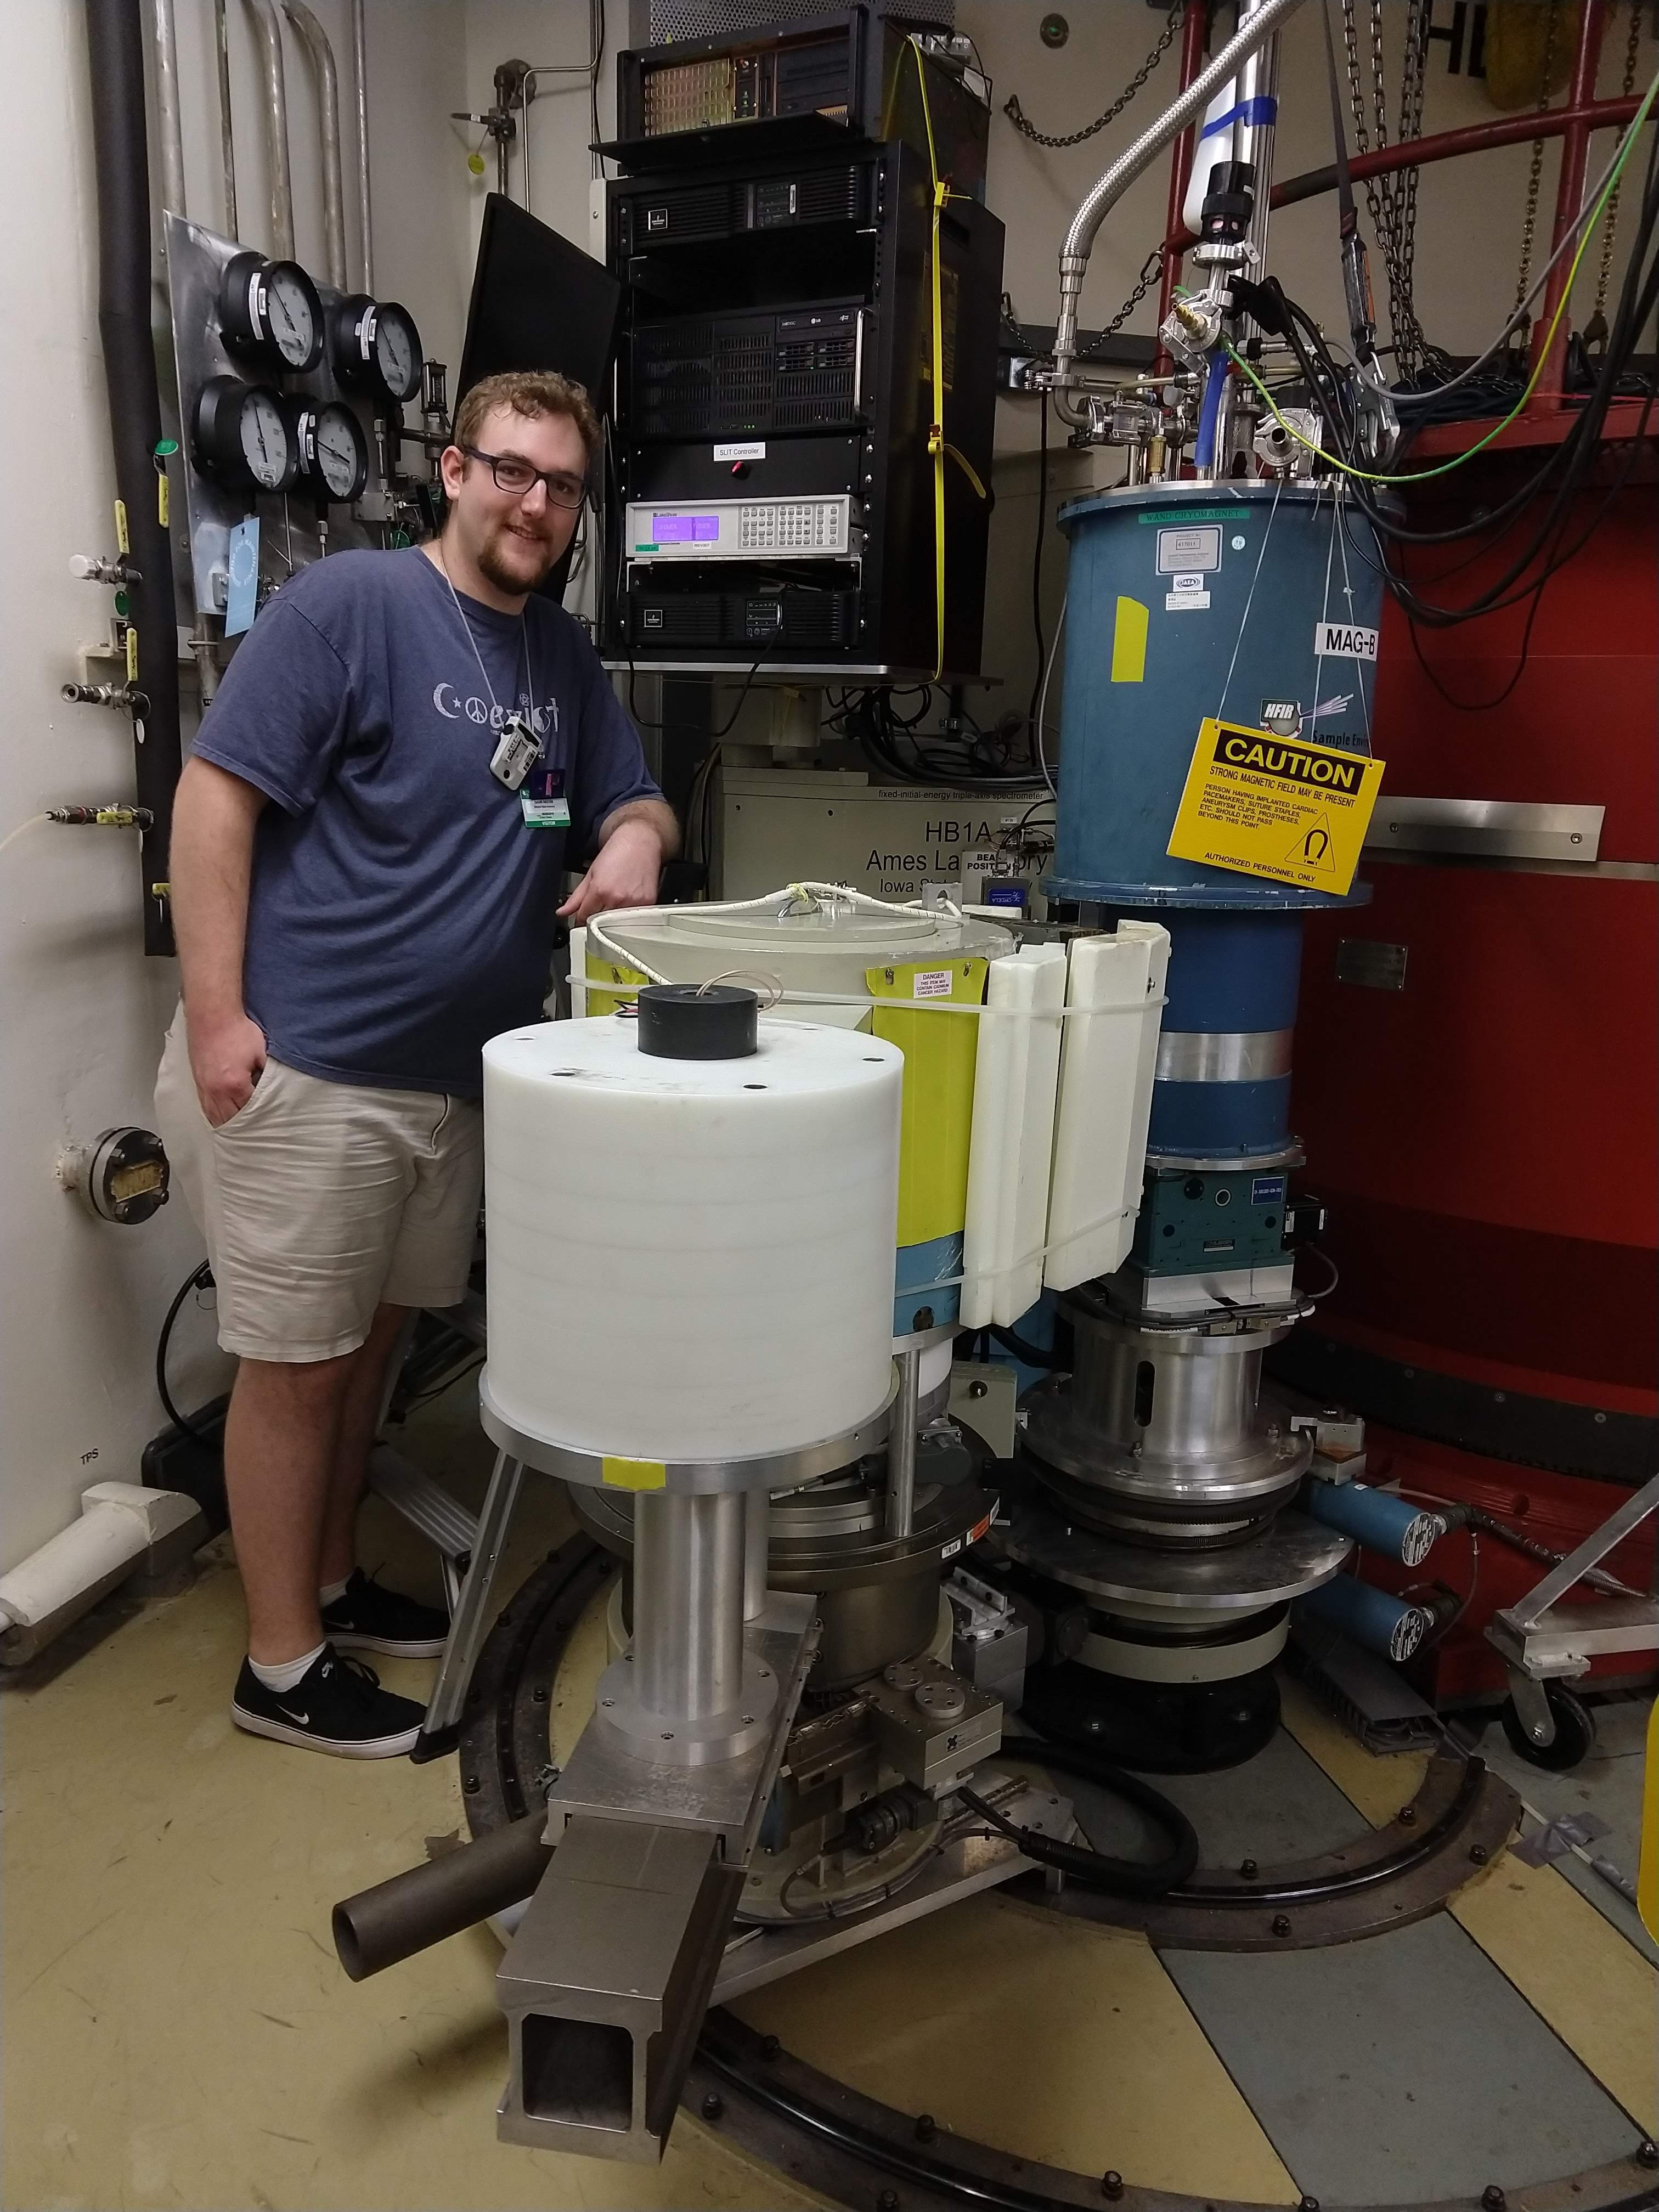 Gavin at ORNL for HB1A Experiment